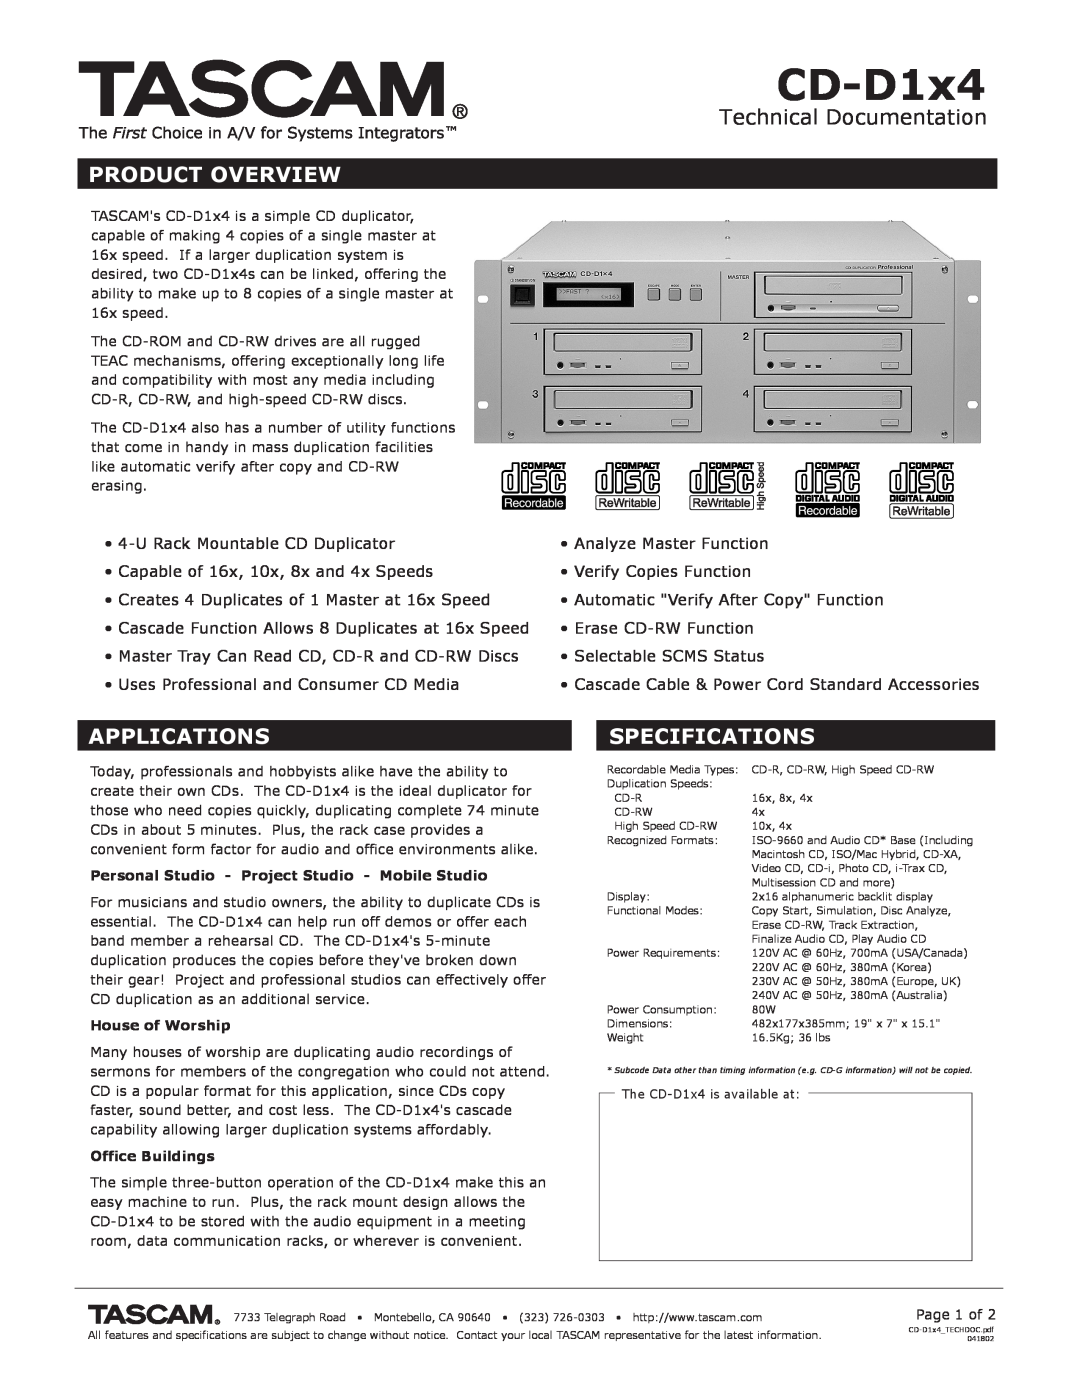 Tascam CD-D1X4 specifications Technical Documentation, Product Overview, Applications, Specifications, CD-D1x4 